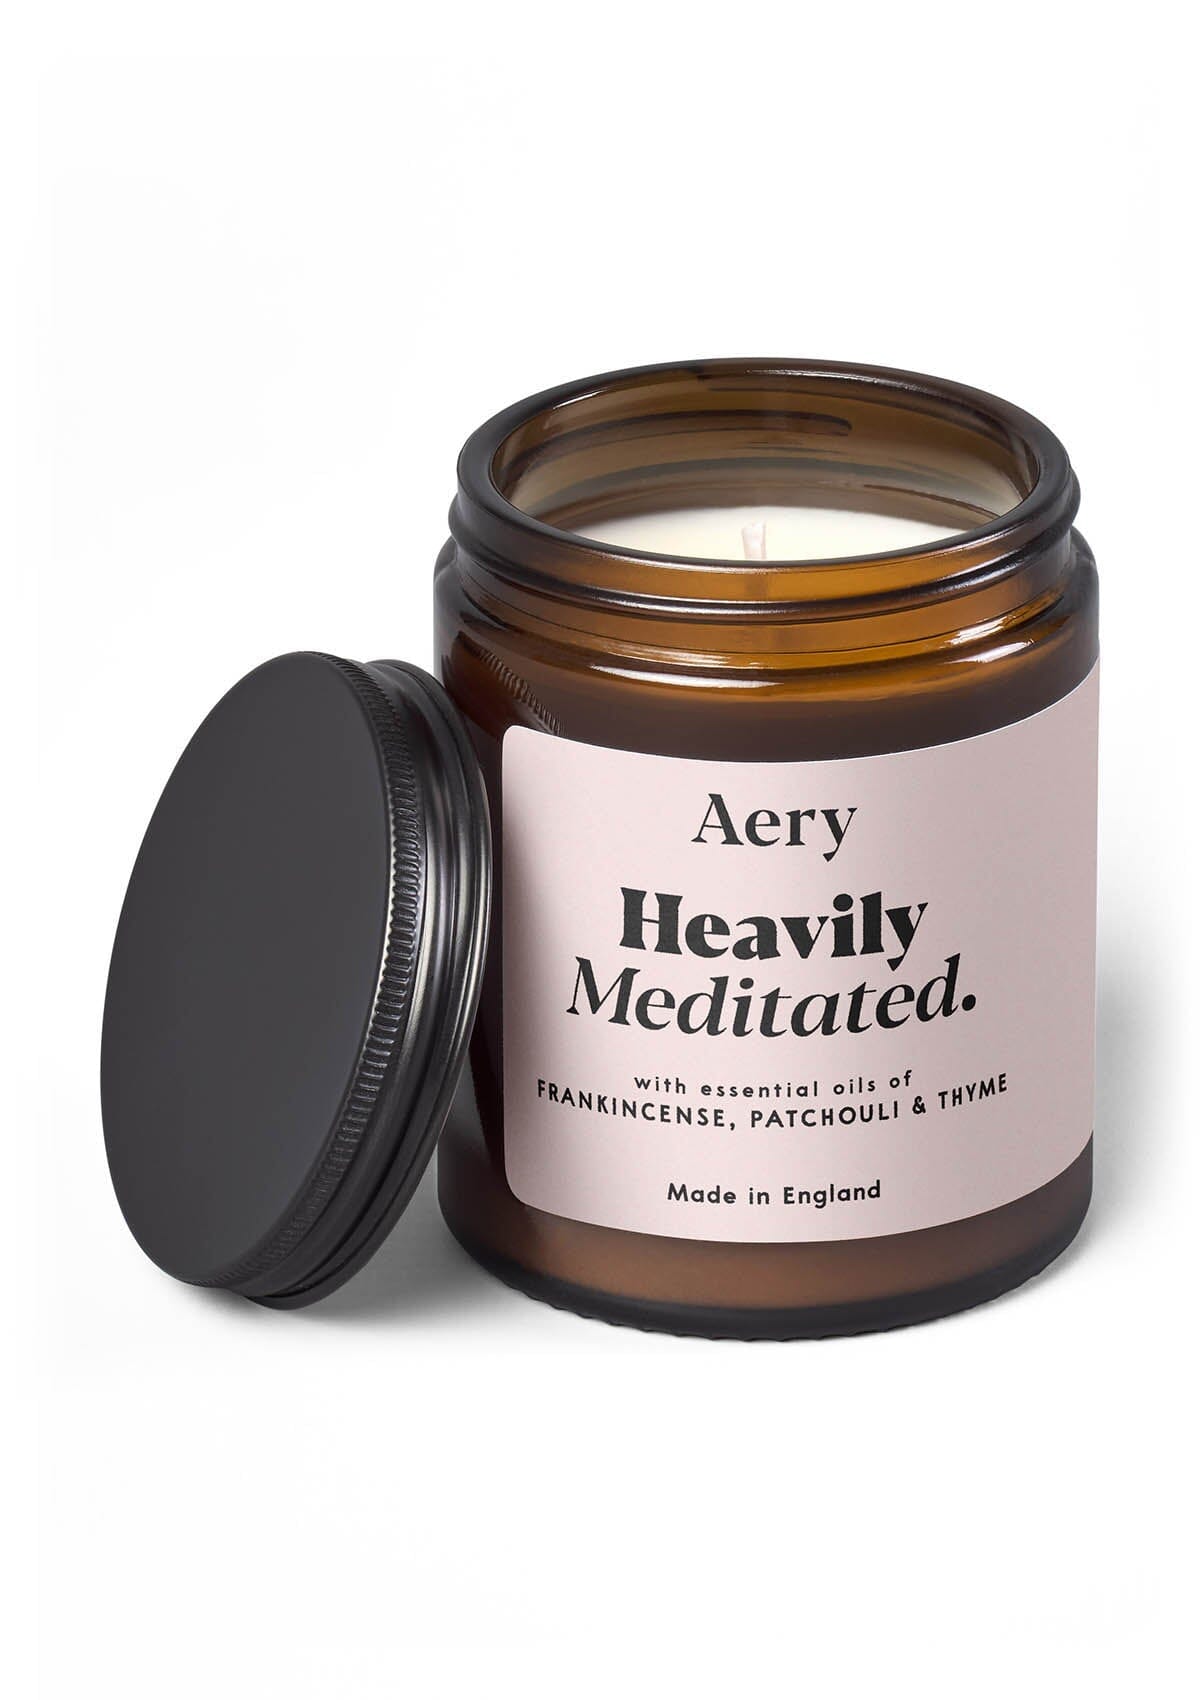 Beige Heavily Meditated jar candle by Aery on white background 